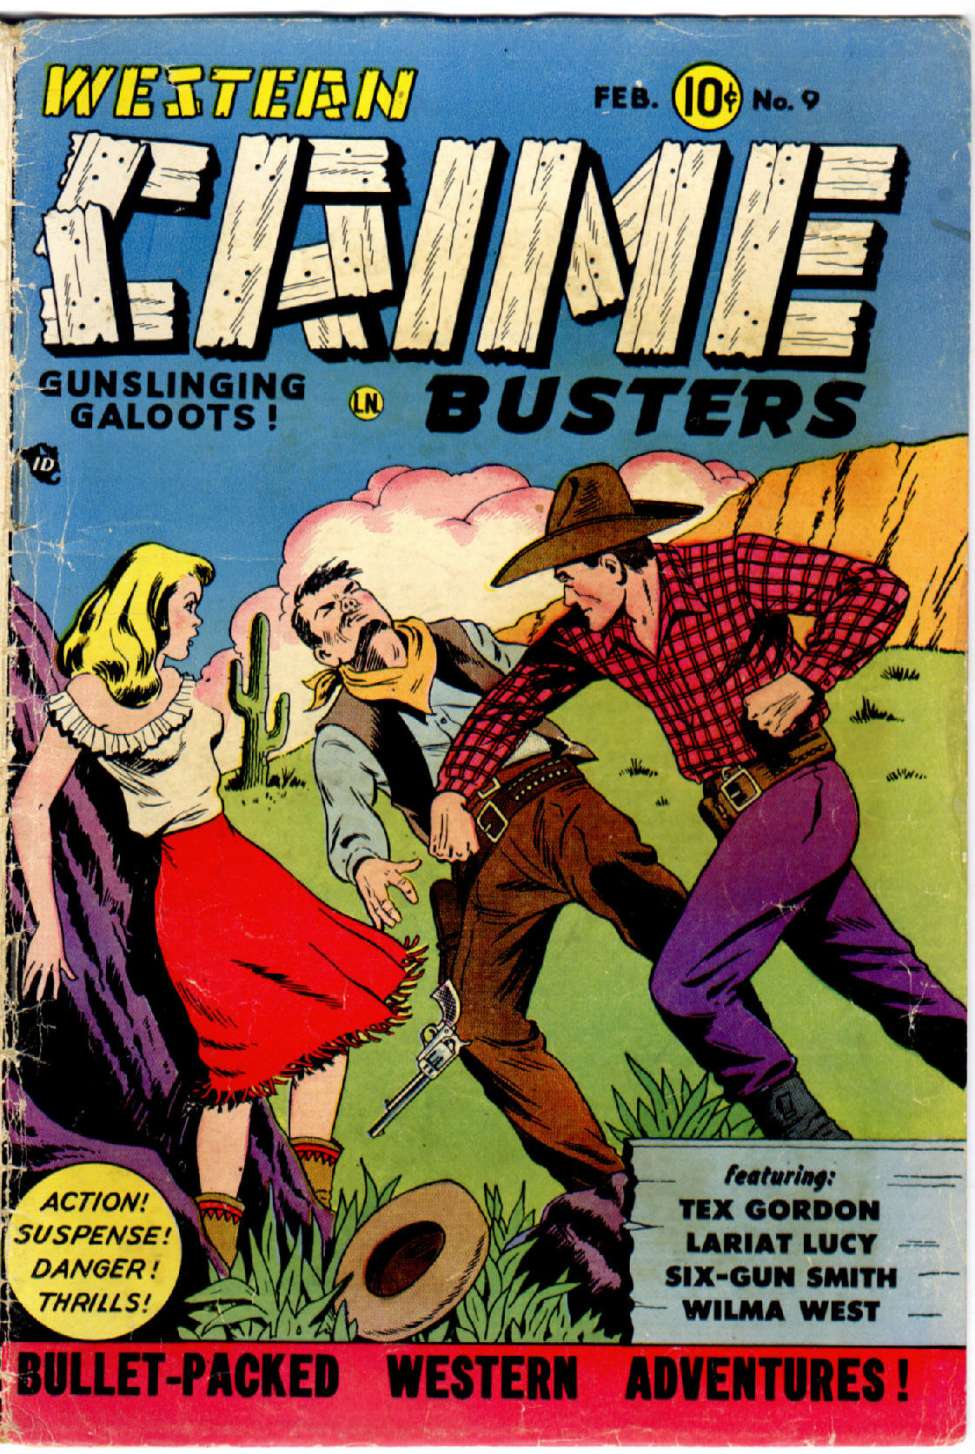 Comic Book Cover For Western Crime Busters 9 (alt) - Version 2